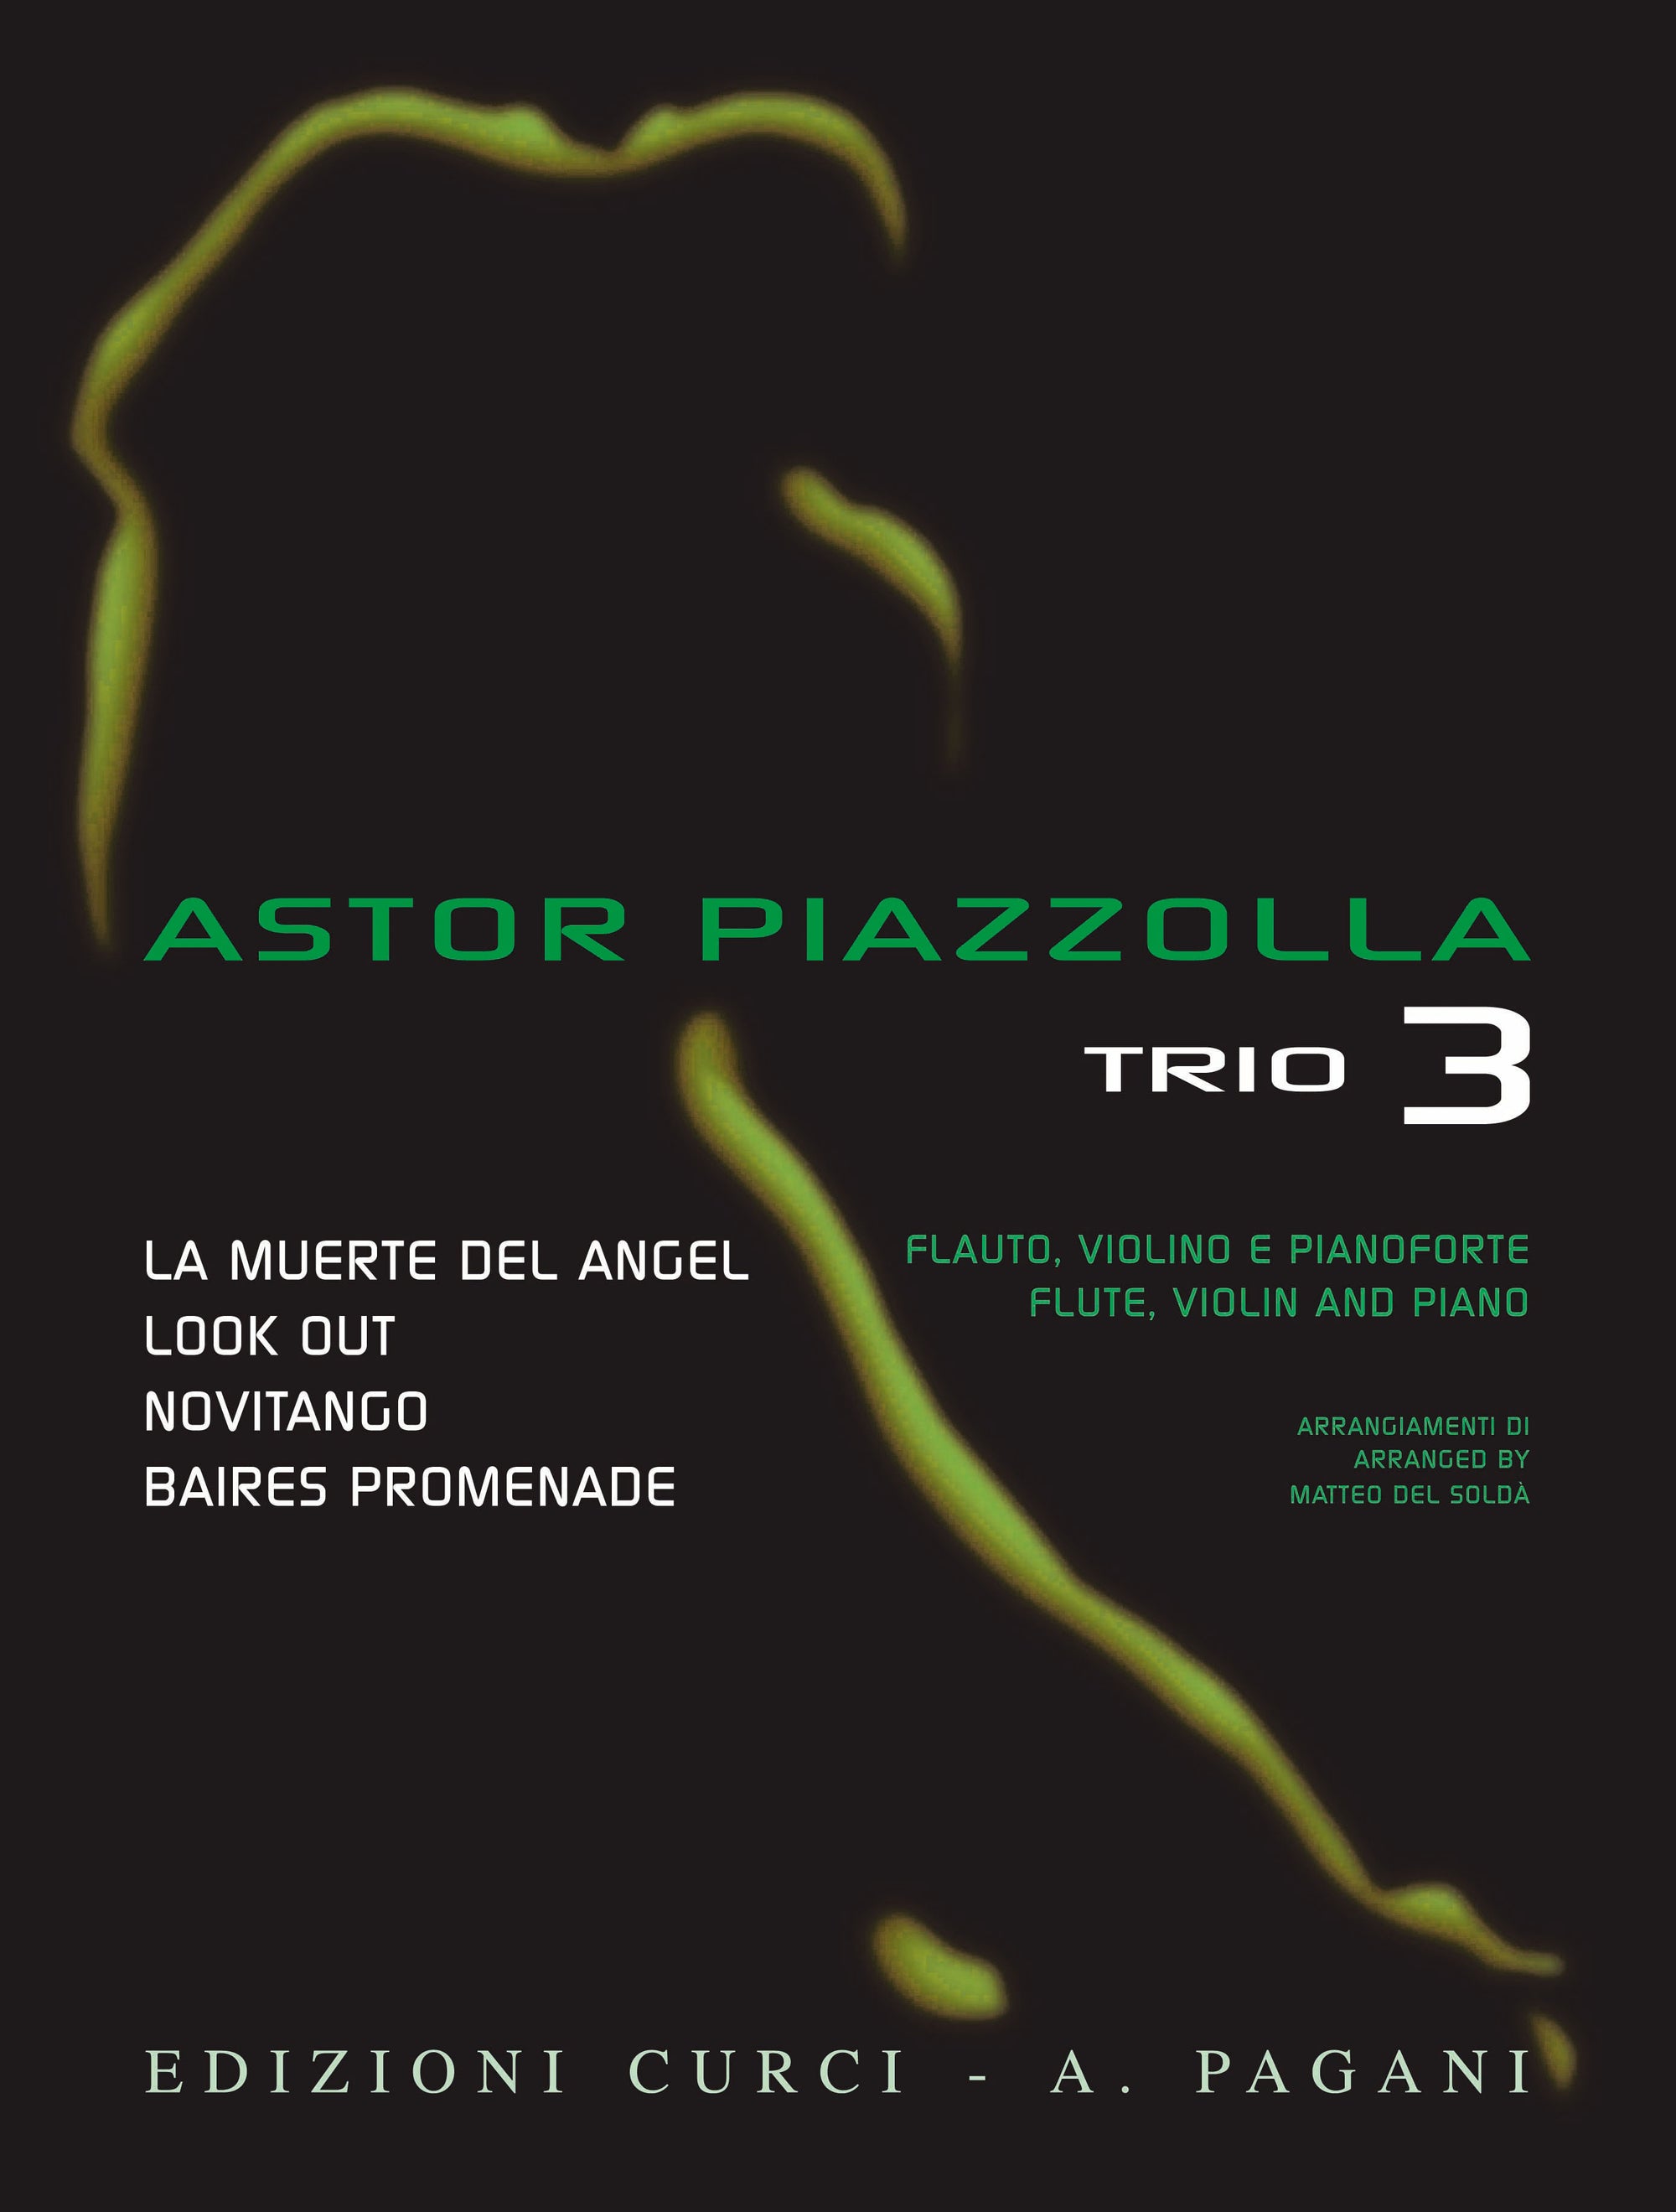 Piazzolla for Trio - Volume 3